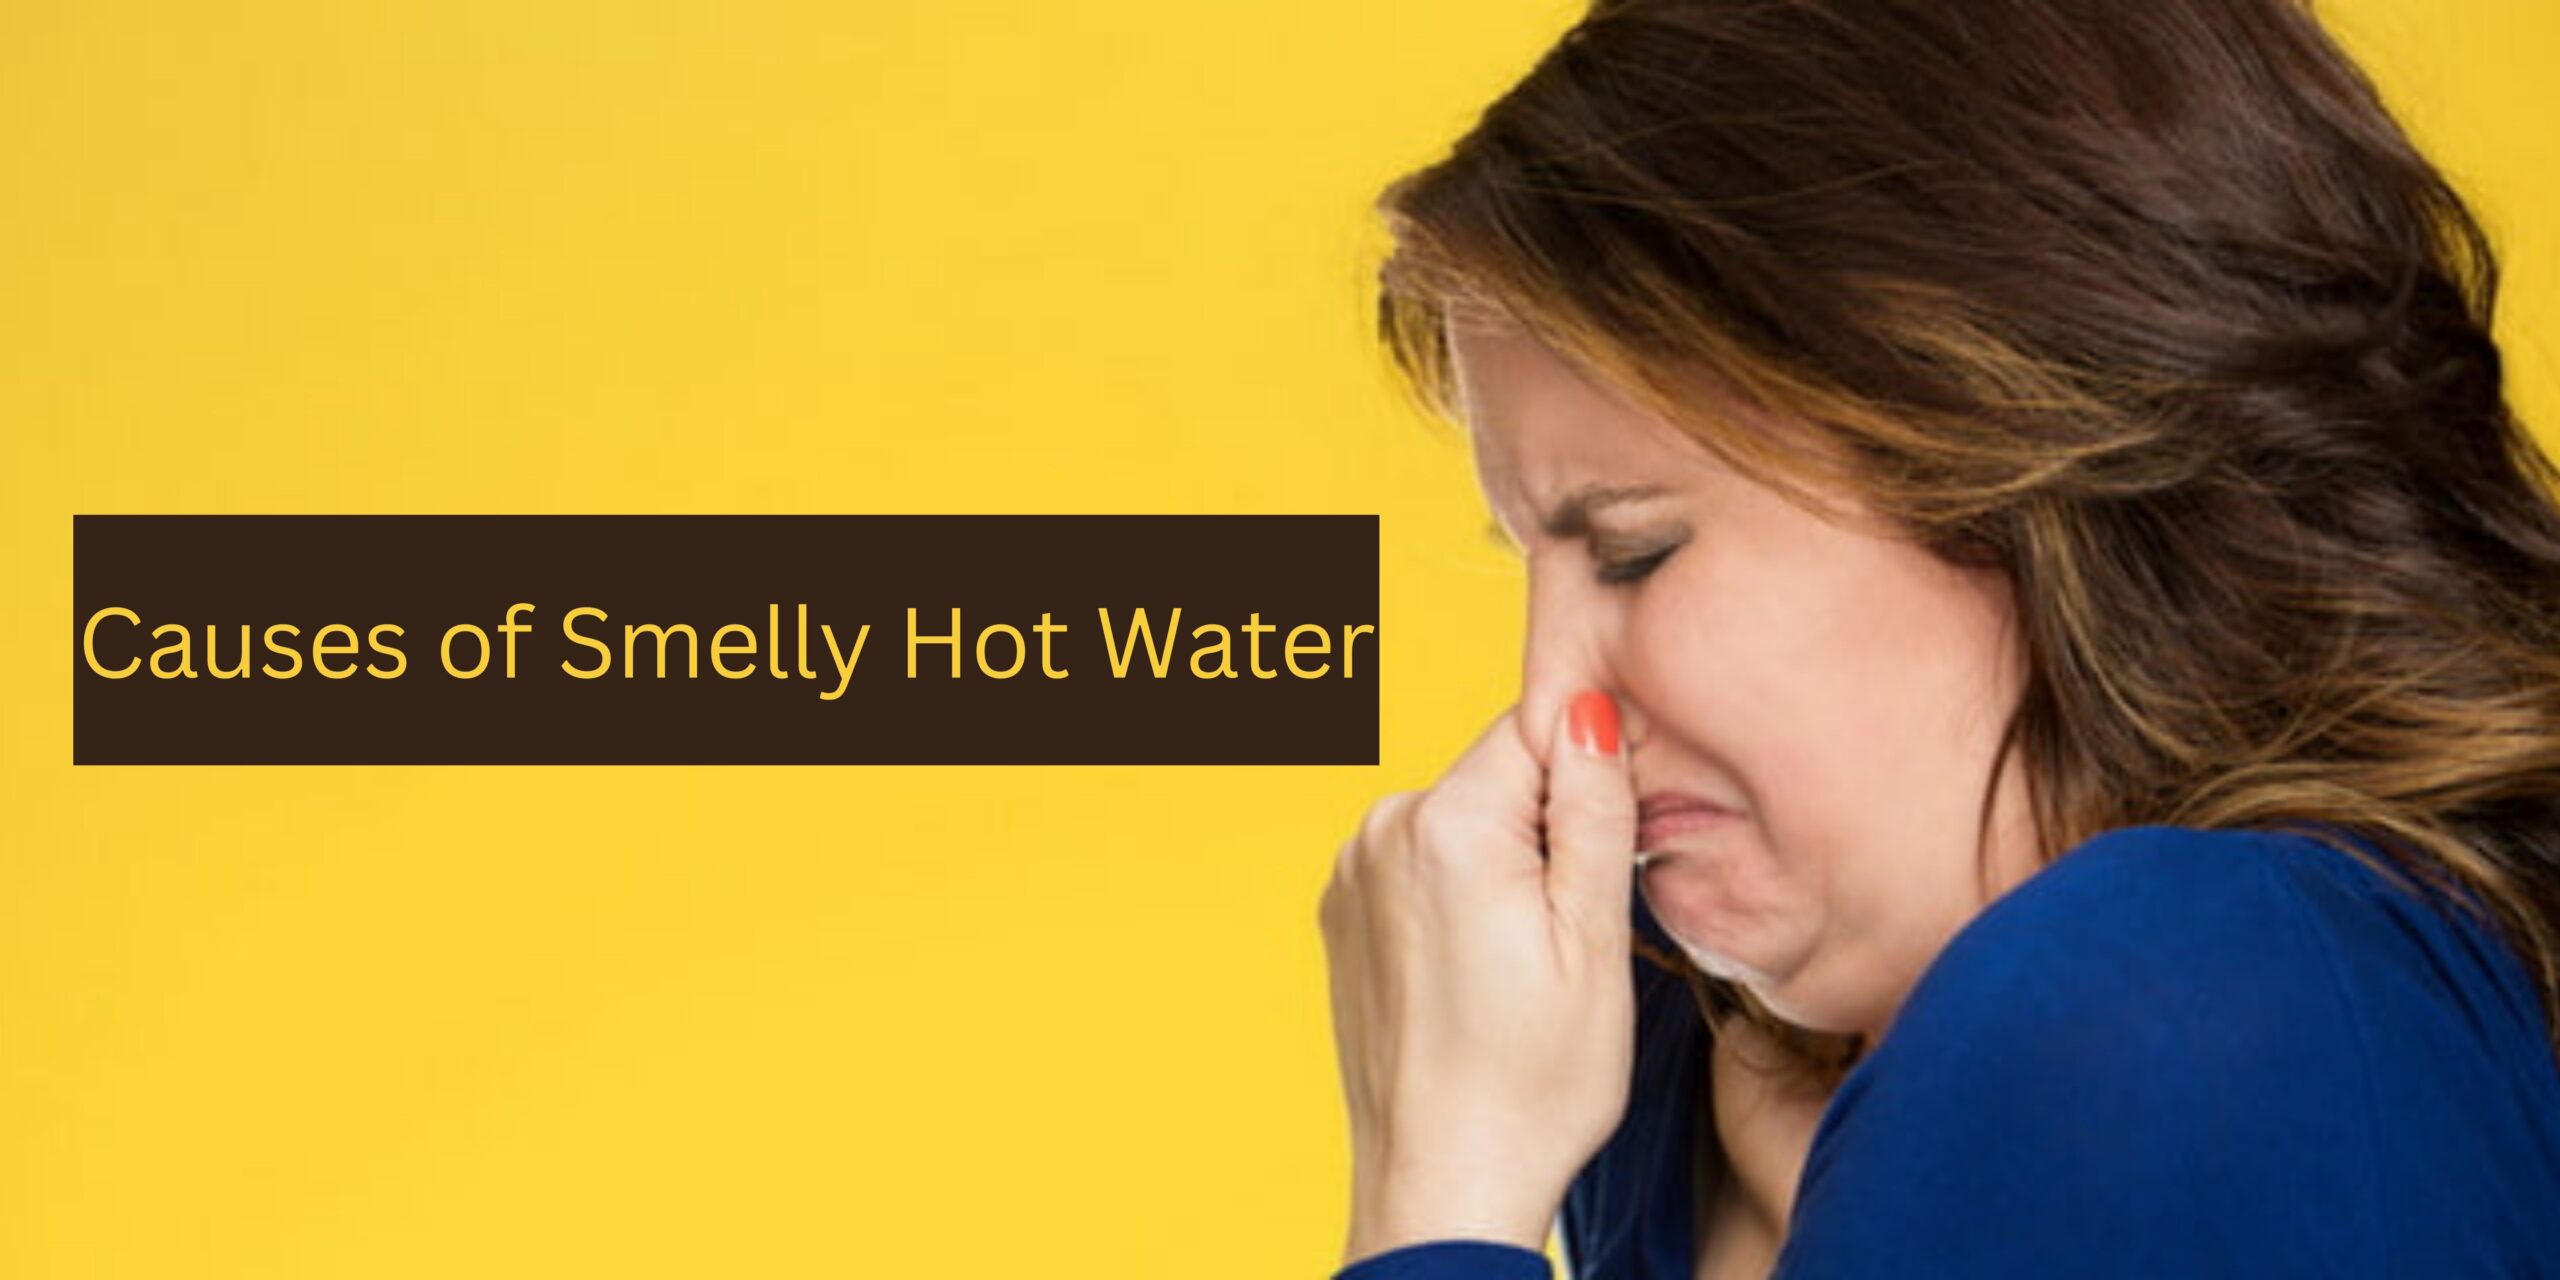 What Are The Causes of Smelly Hot Water?